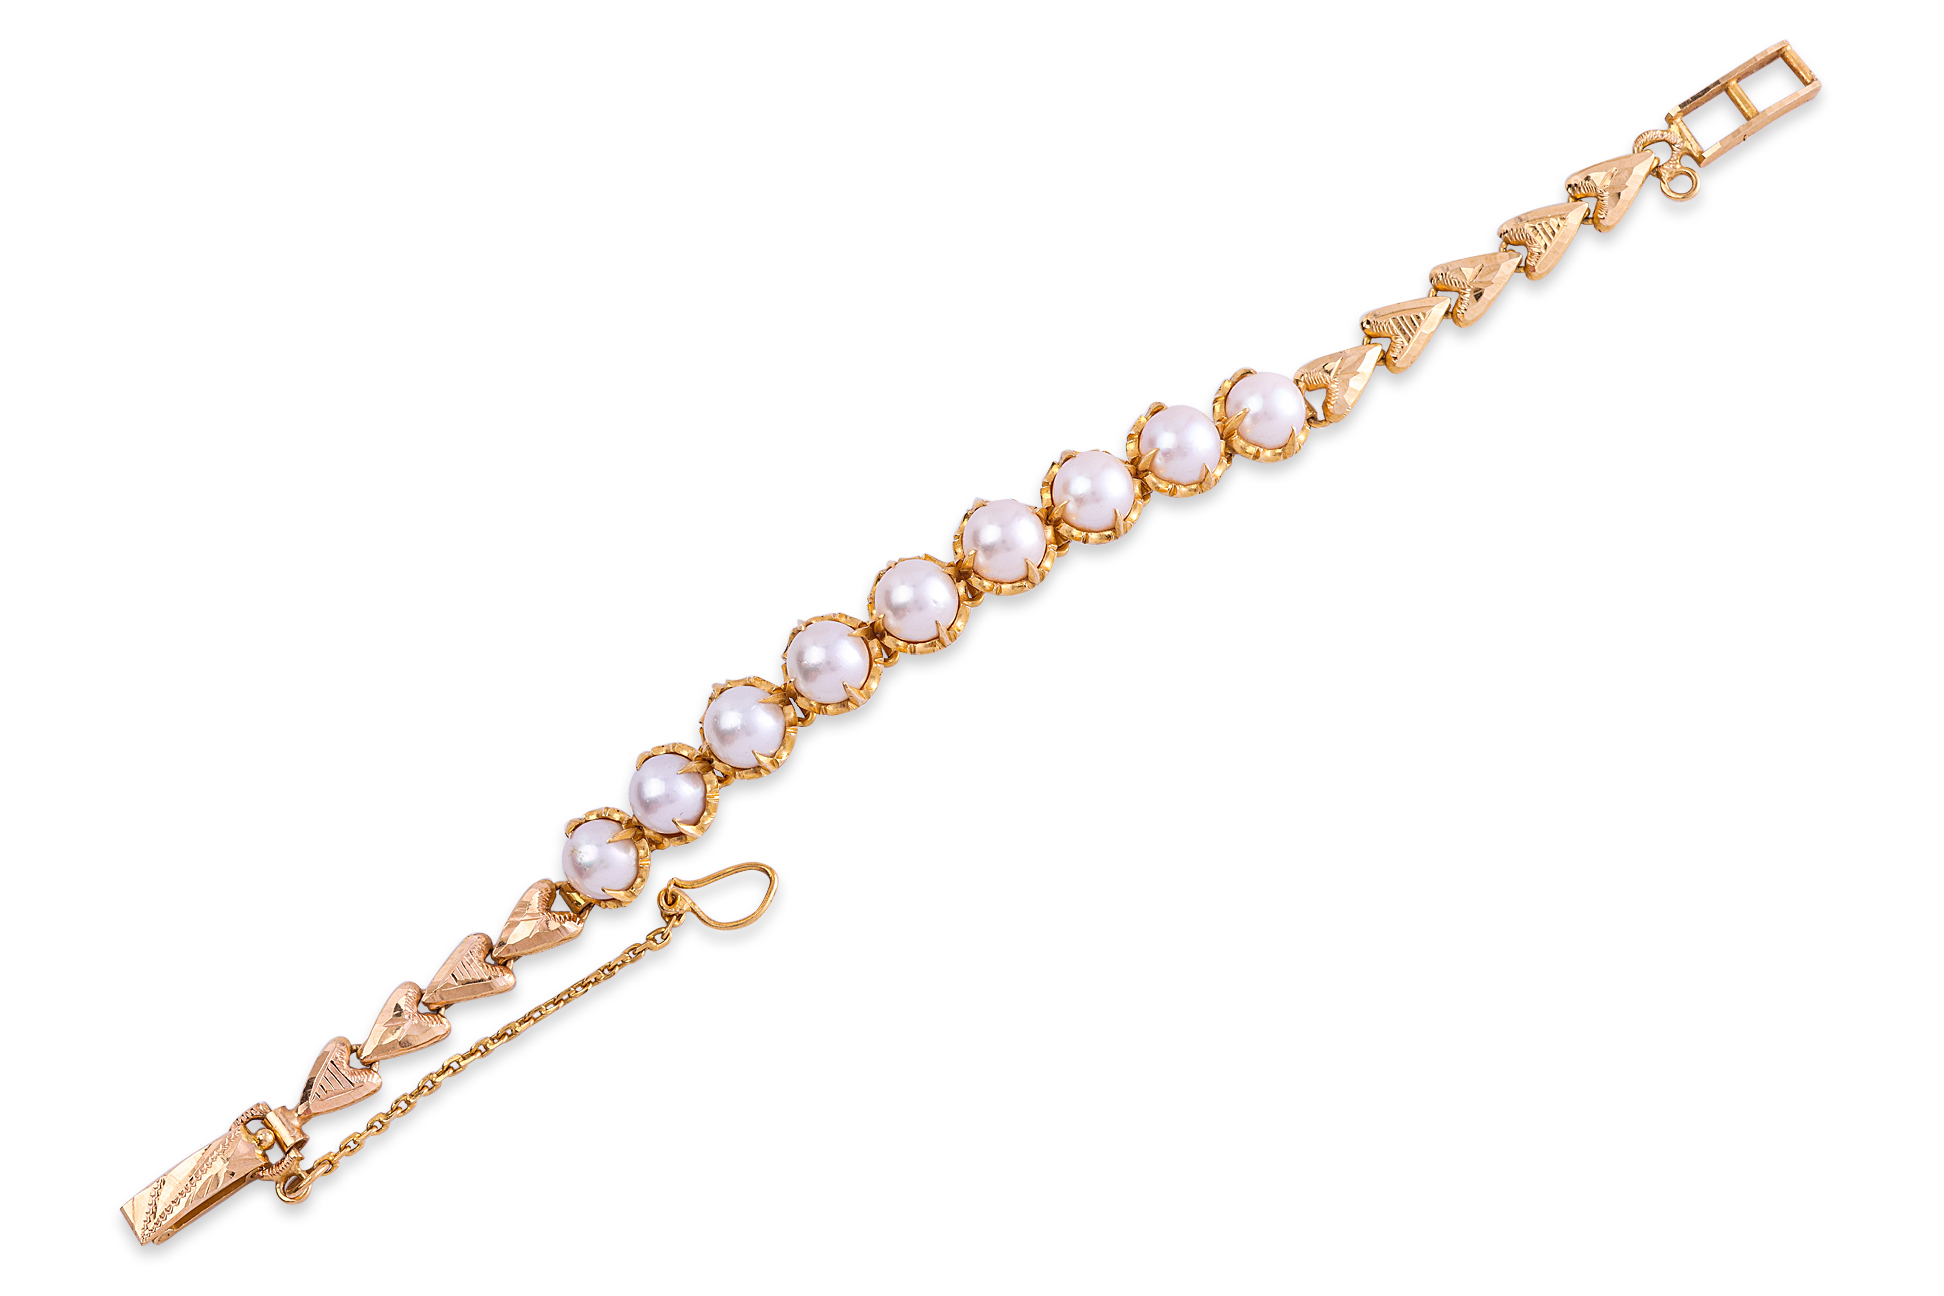 A CULTURED AKOYA PEARL BRACELET - Image 2 of 3